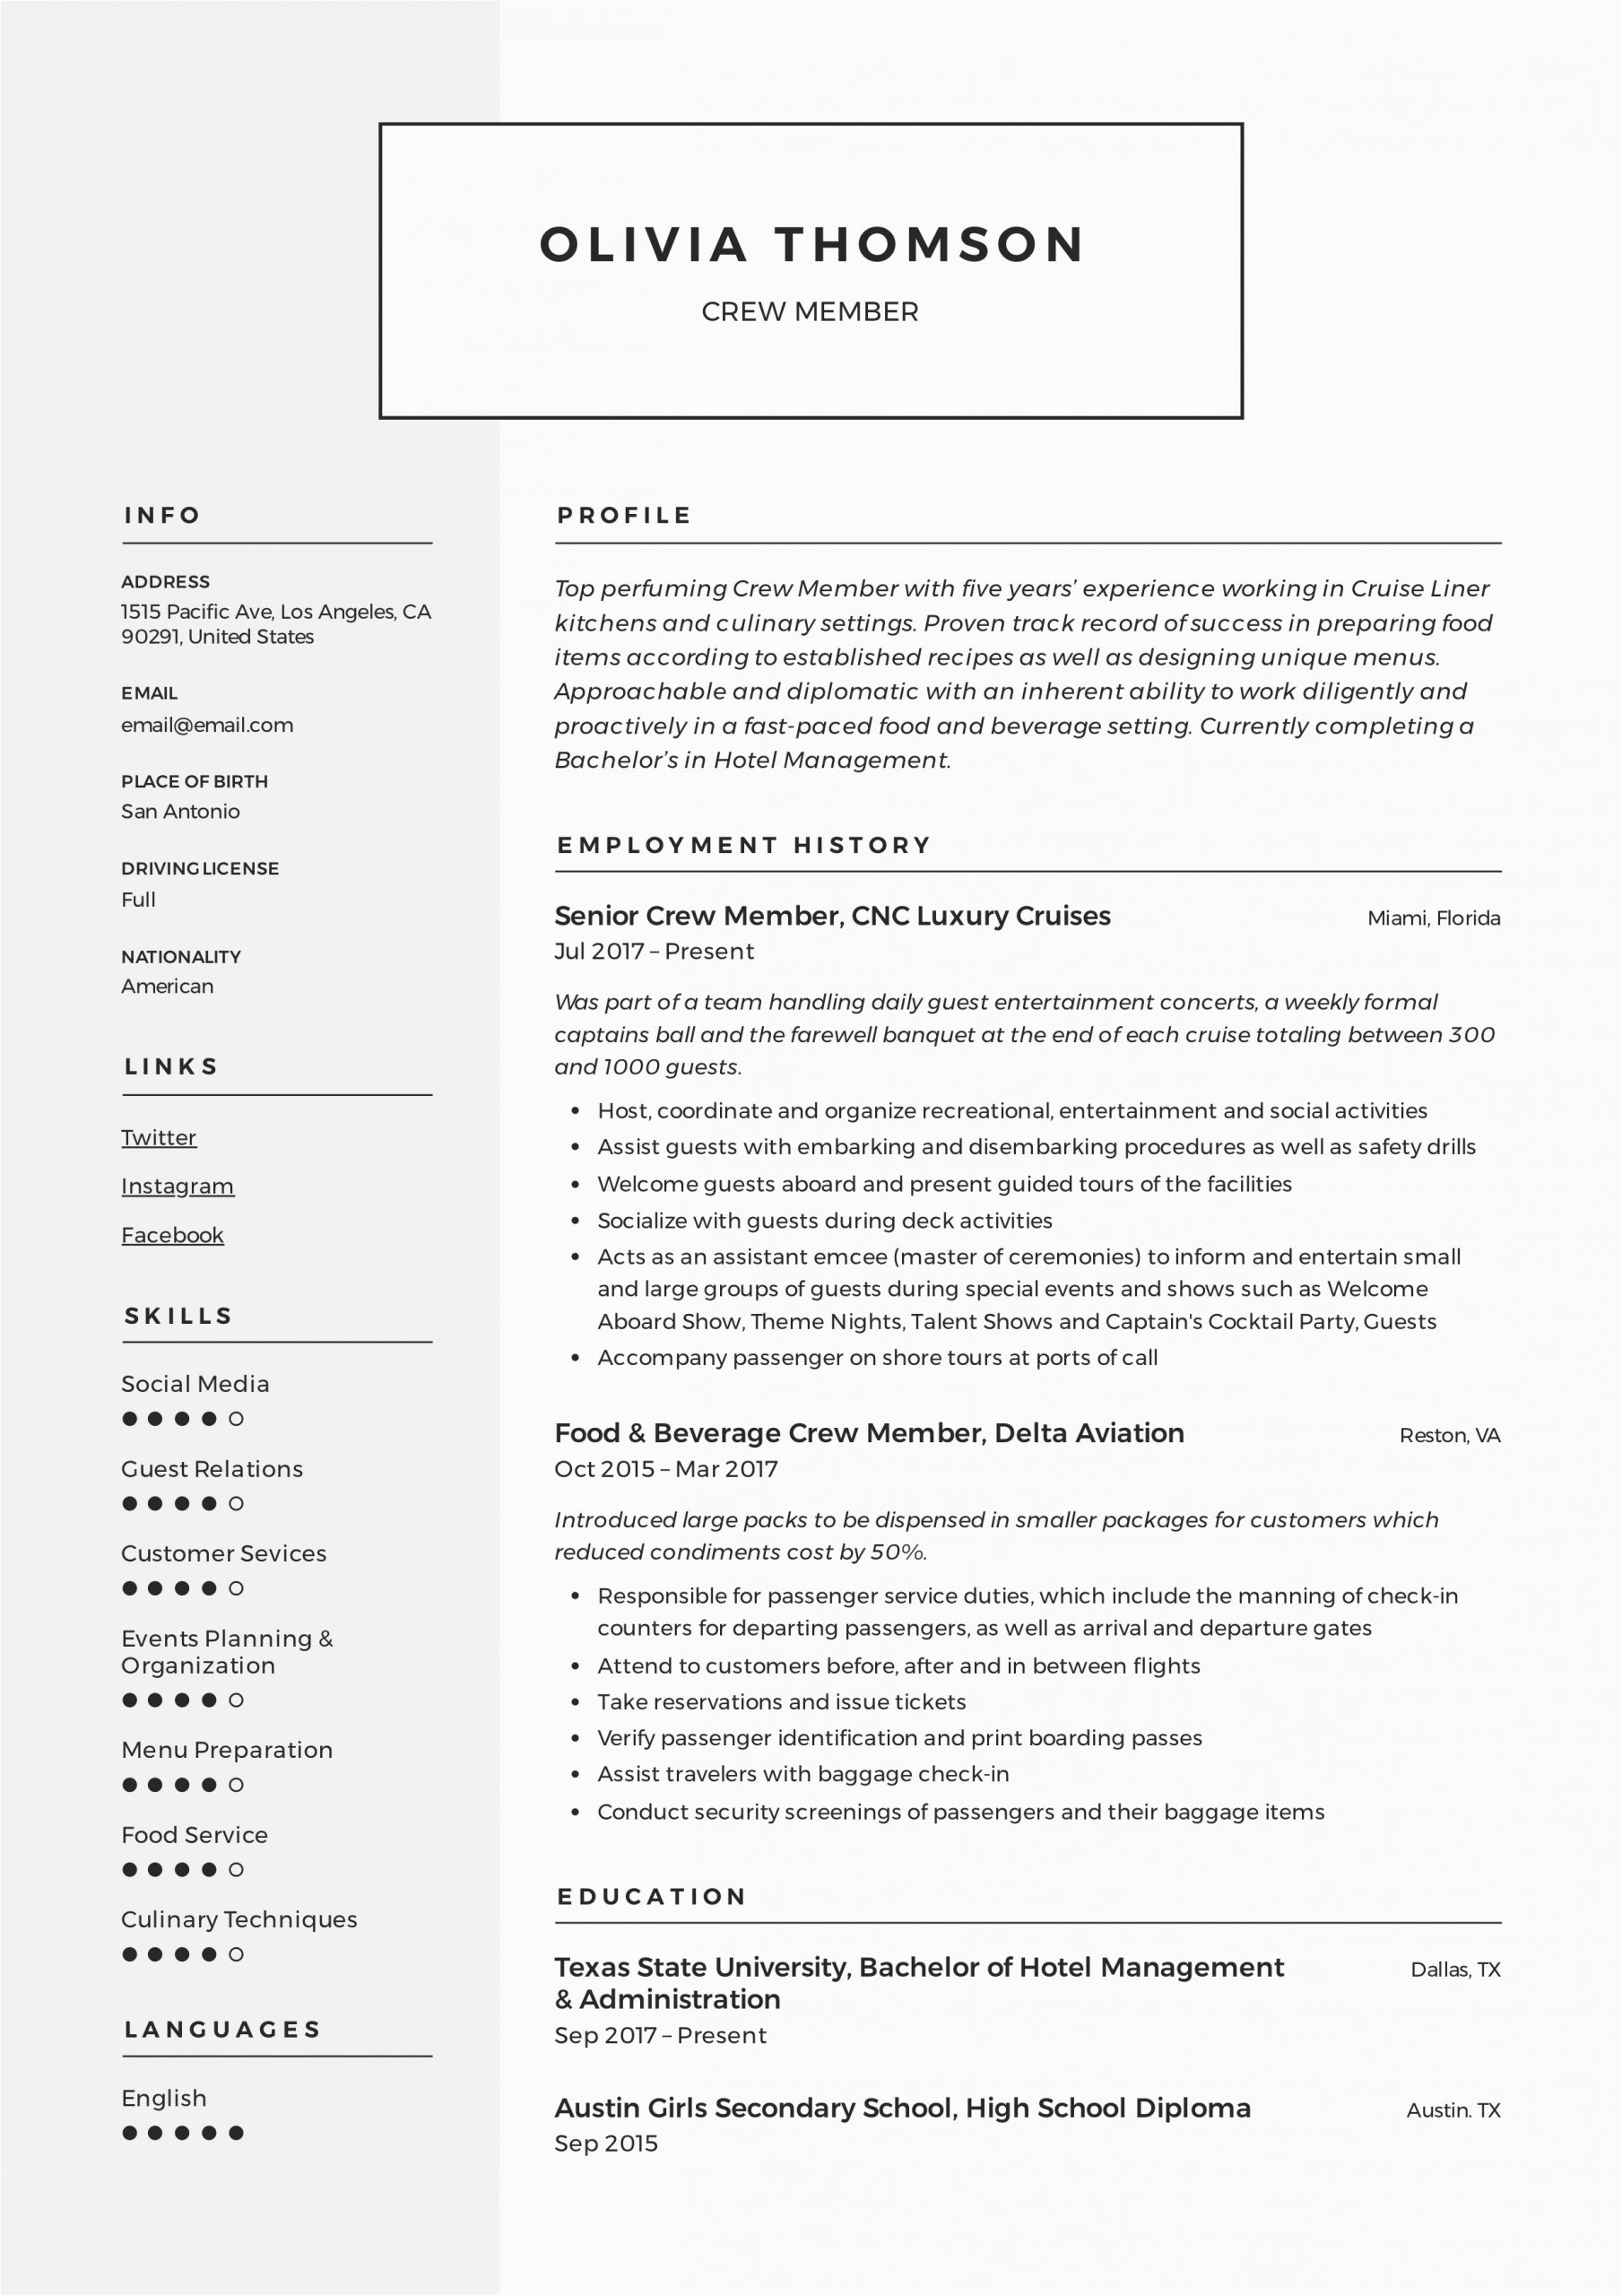 Sample Resume for Fast Food Service Crew without Experience Crew Member Resume & Writing Guide